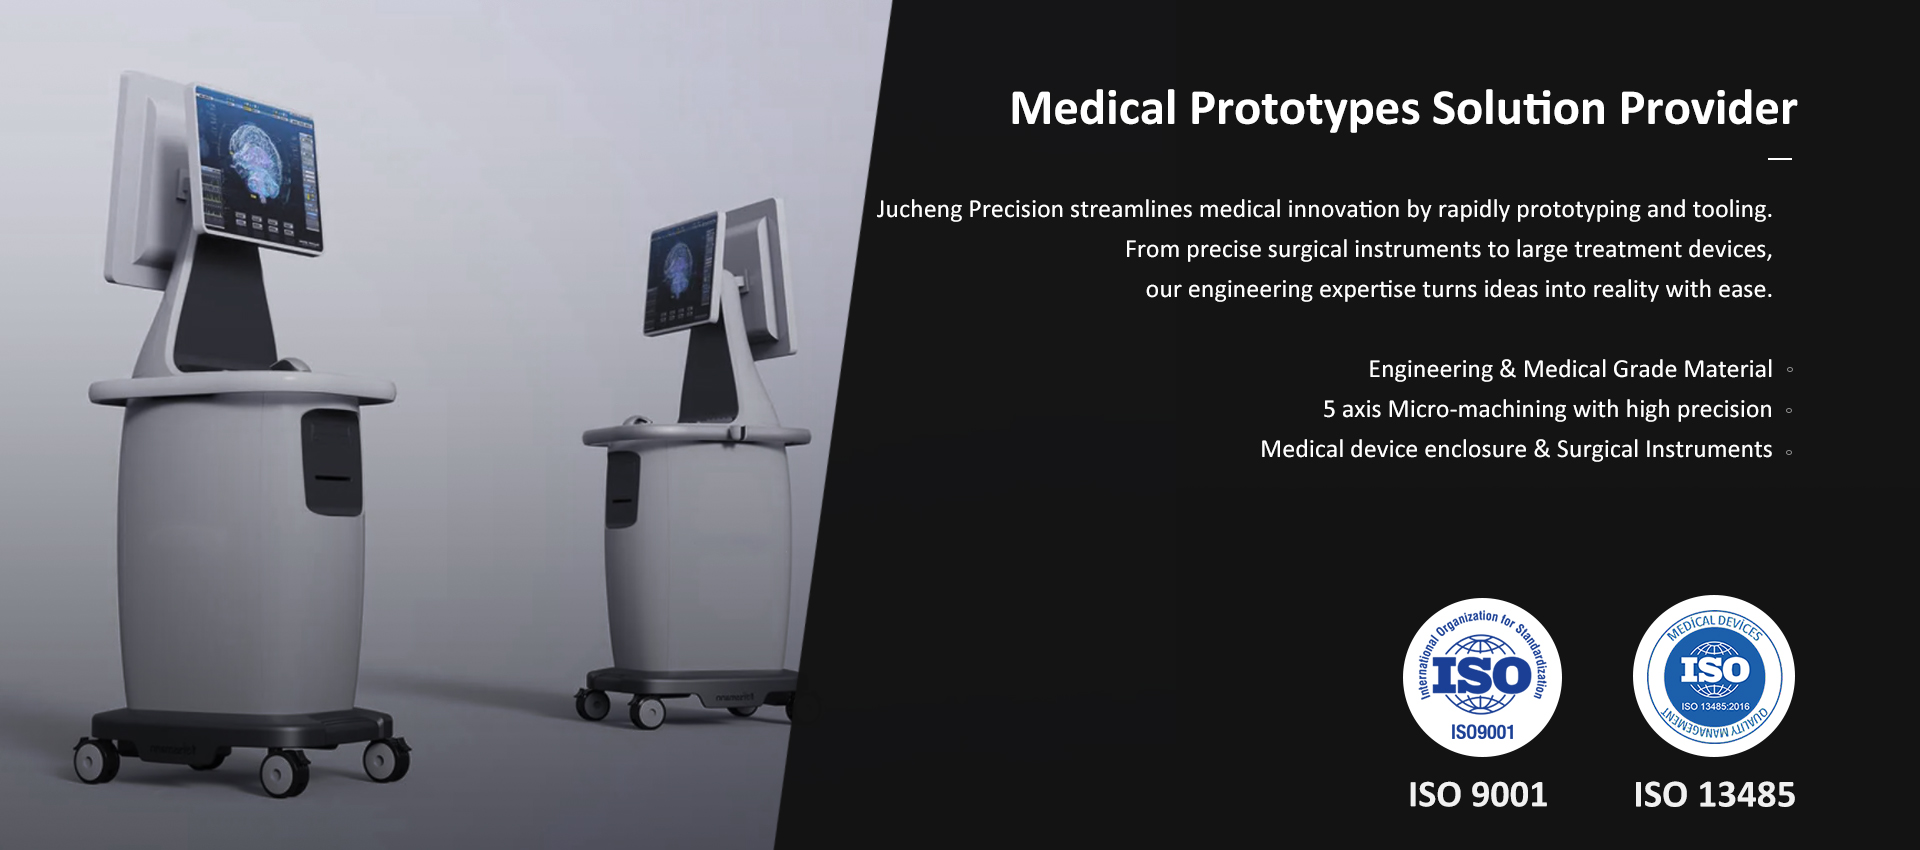 Provide Medical Prototype Solutions | Jucheng Precision